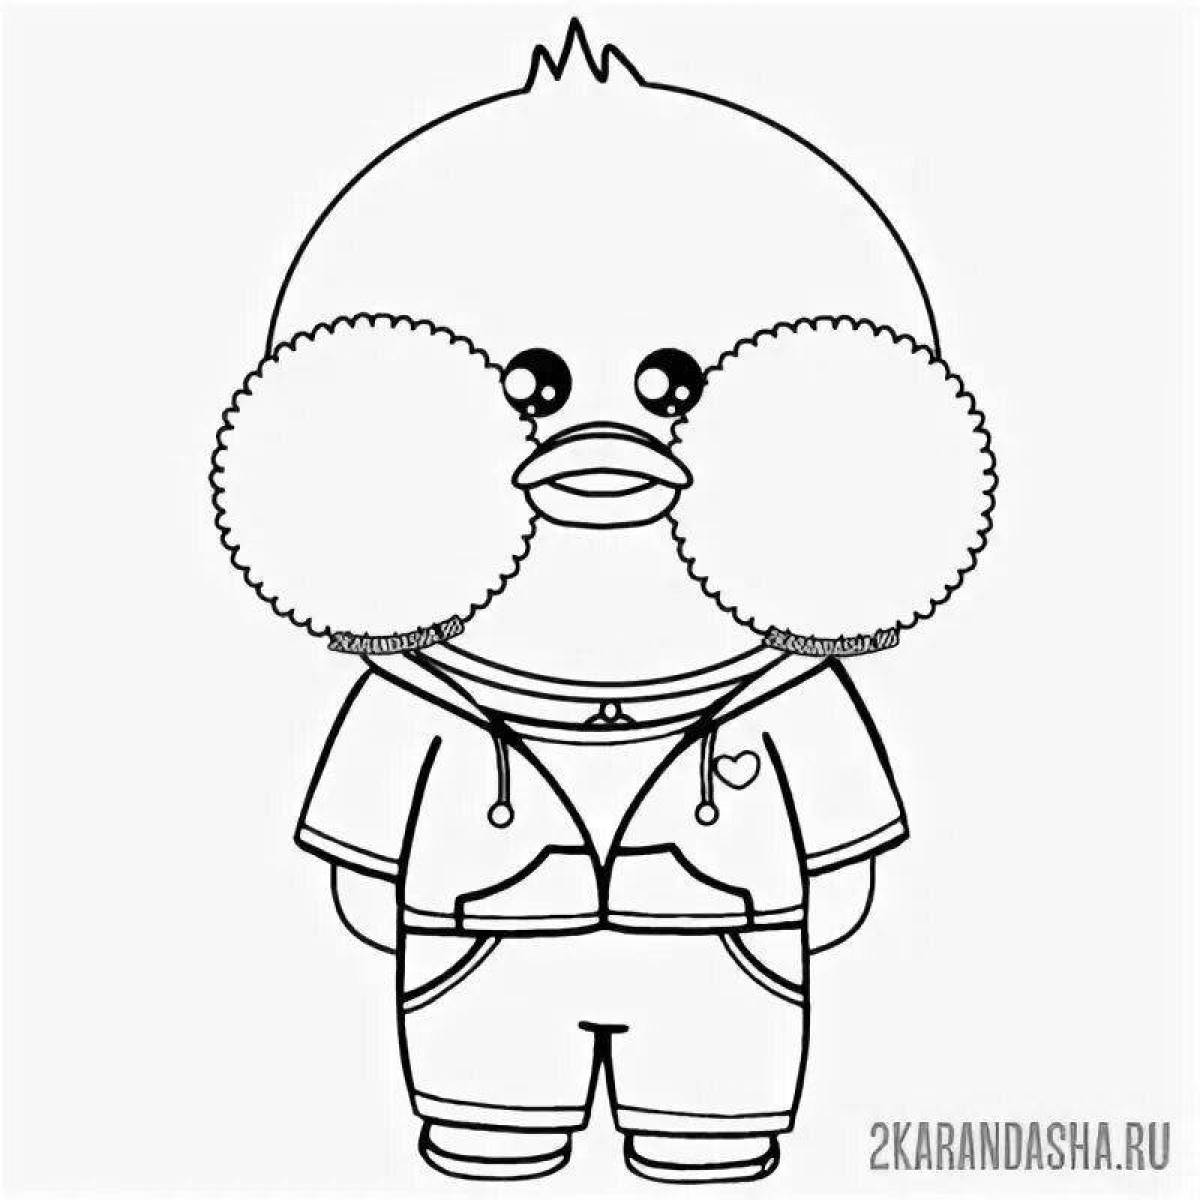 Lafanfan wild duck coloring page